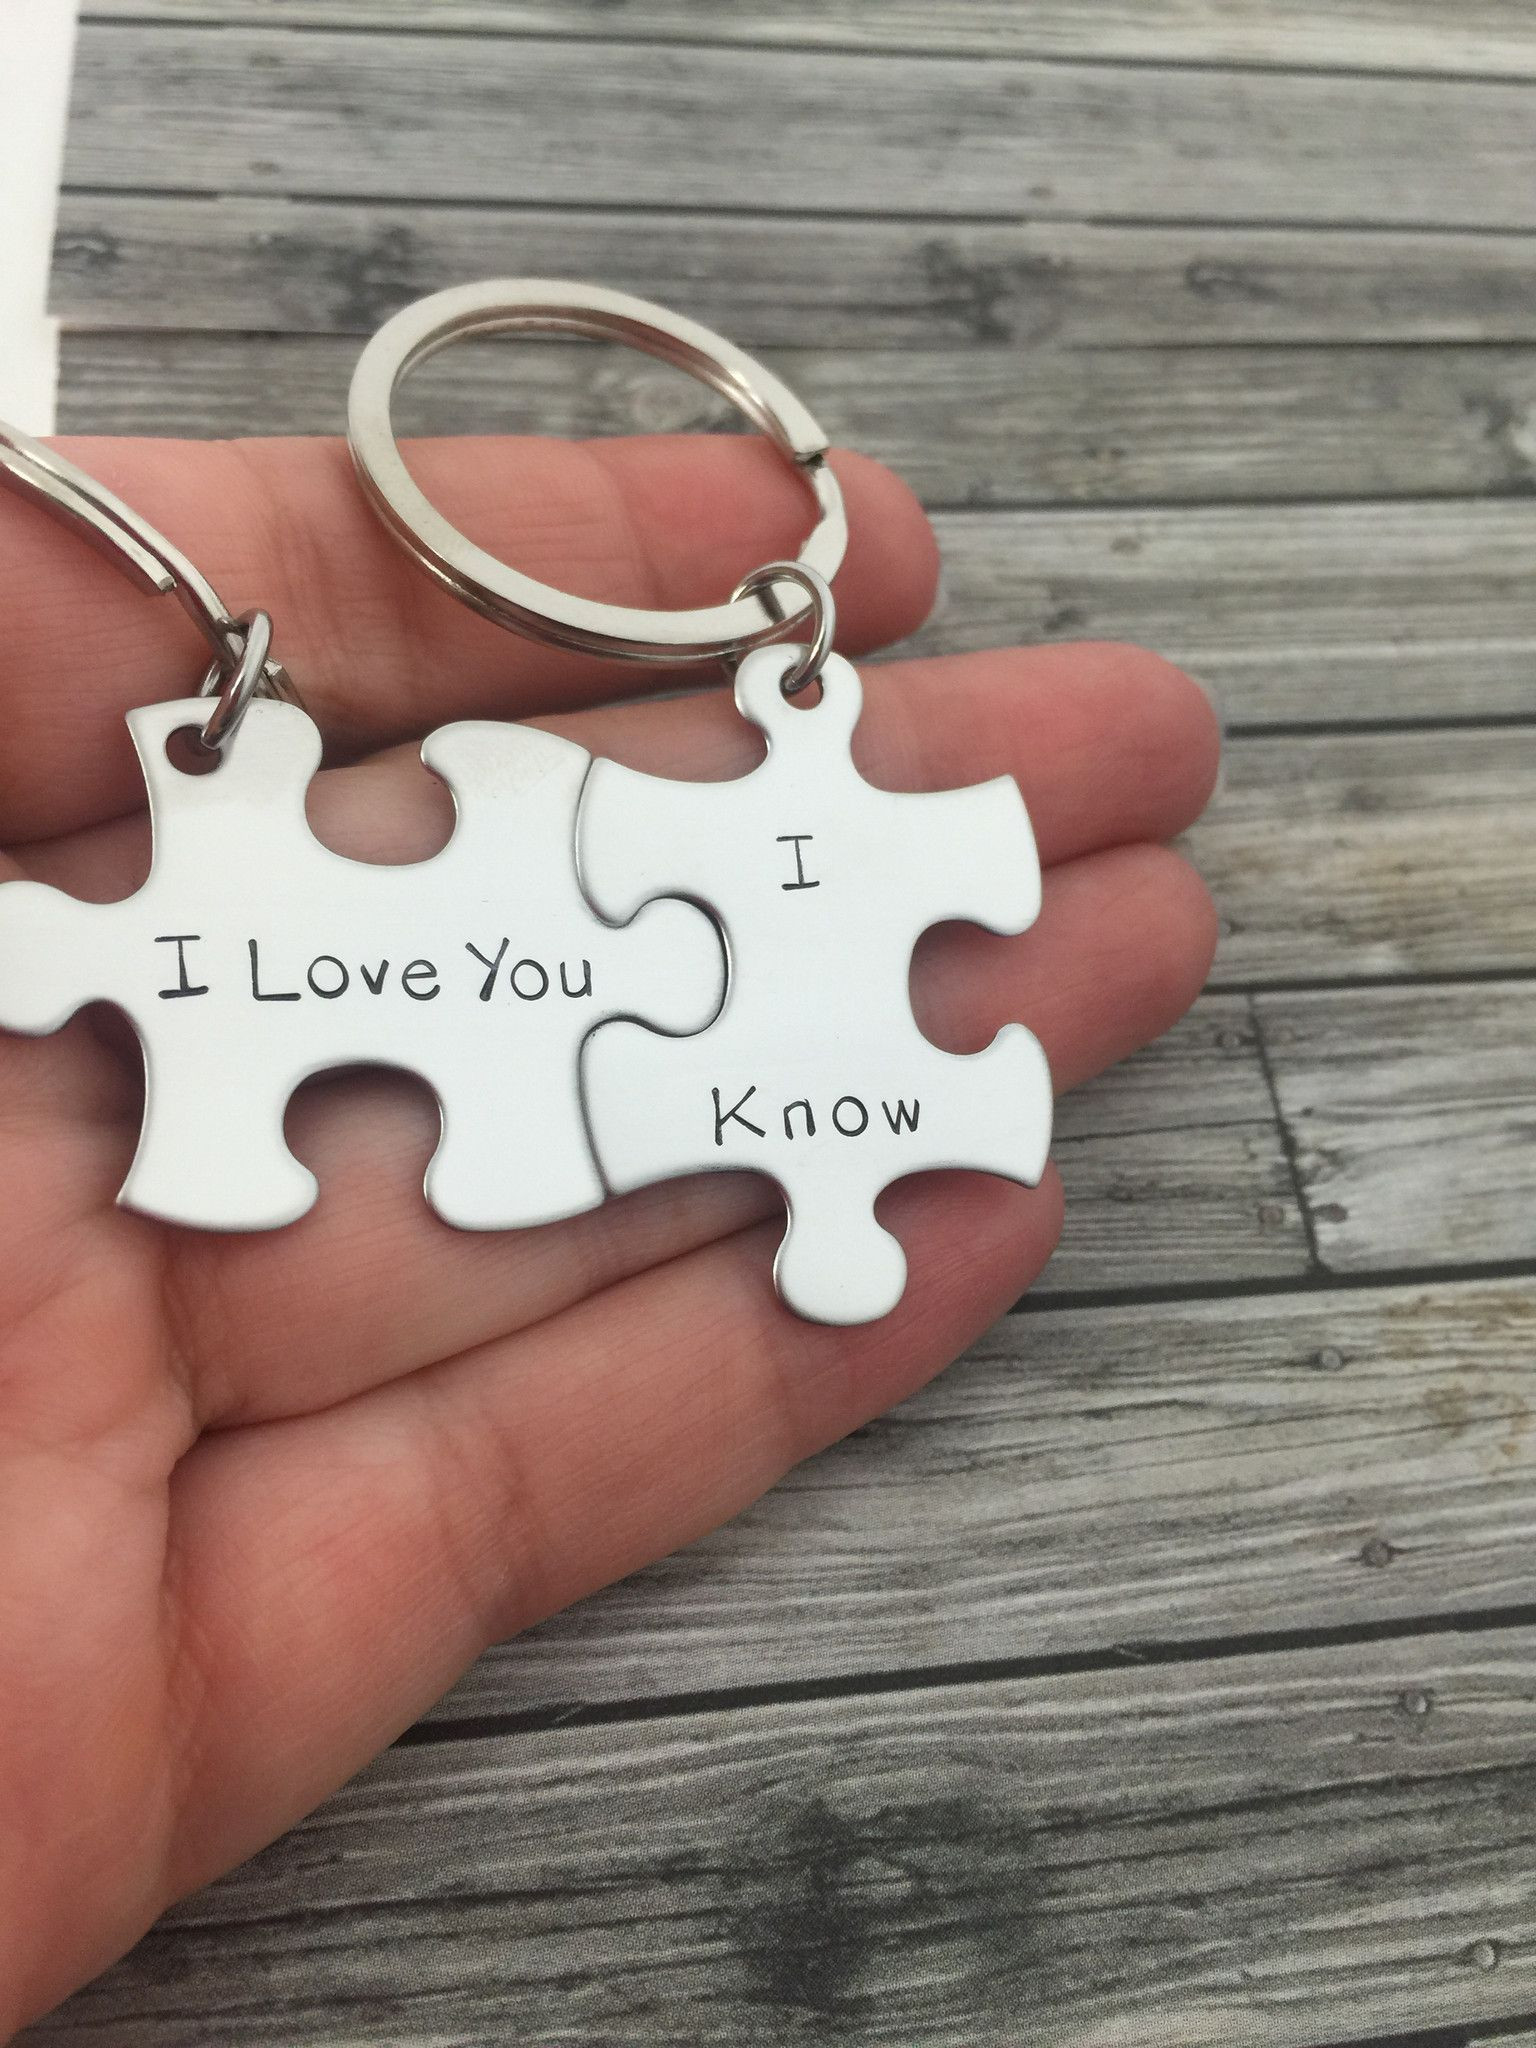 I Love You Gift Ideas For Girlfriend
 I love you I Know keychains Couples Keychains